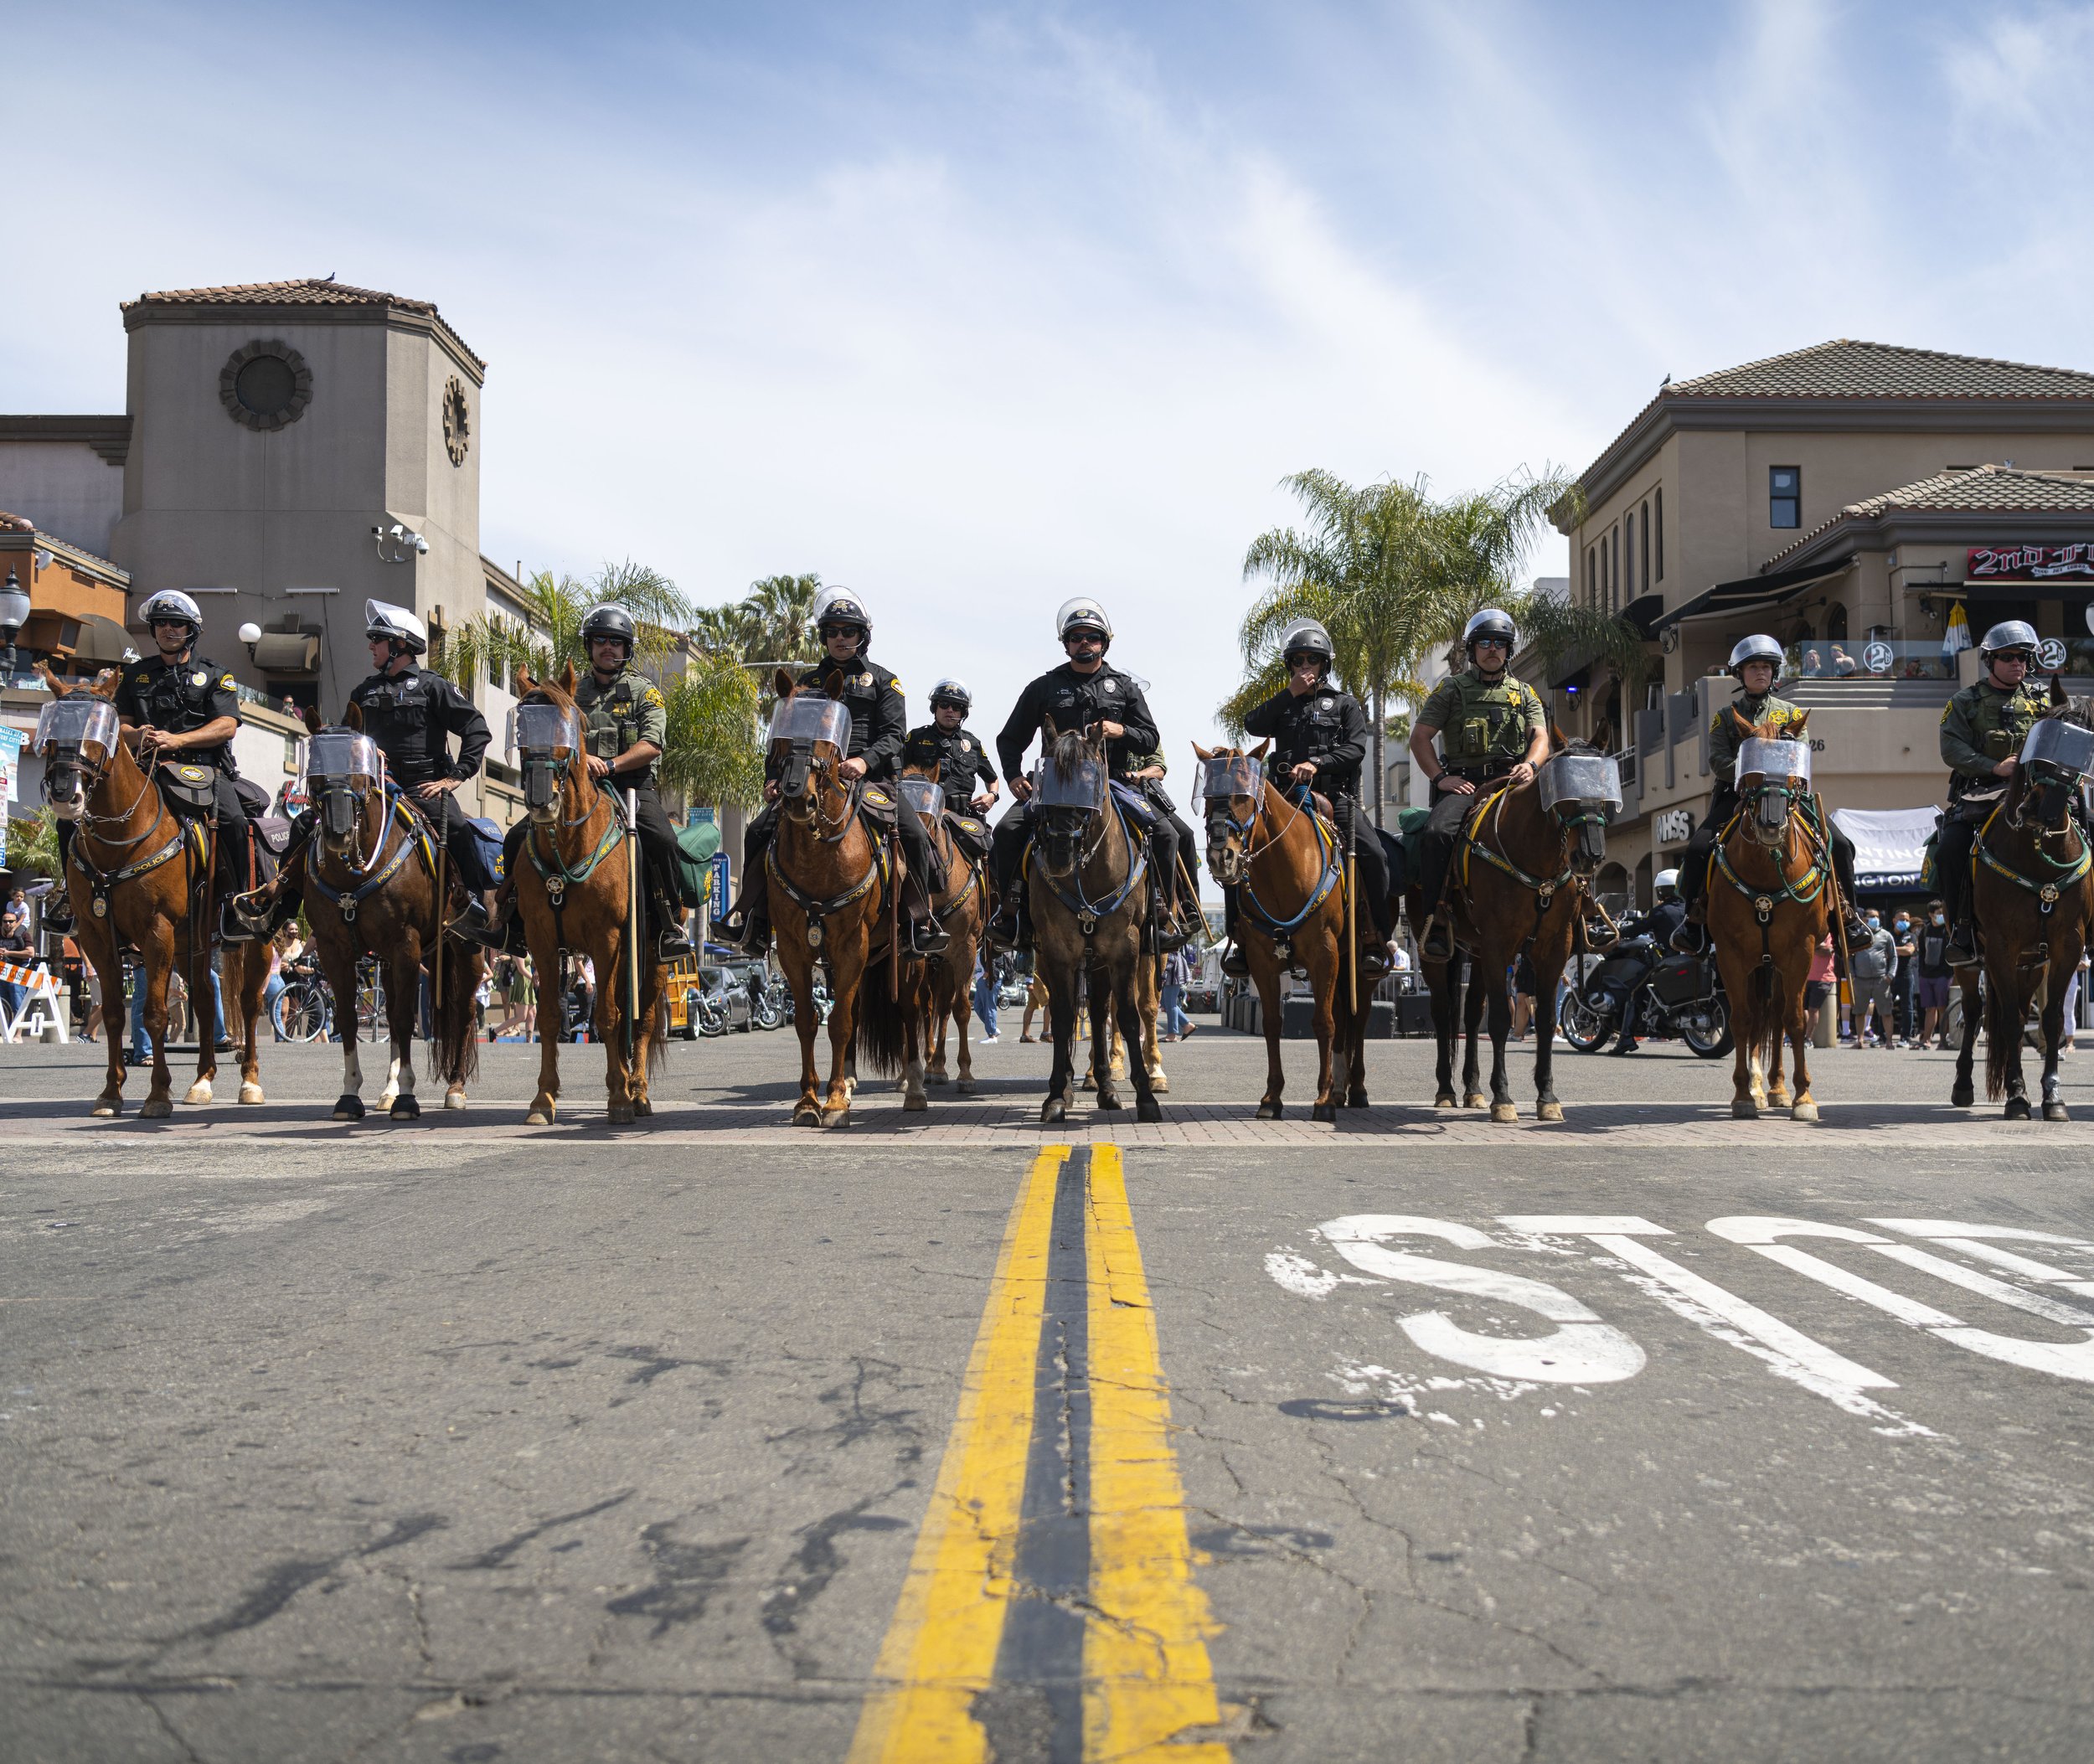  Huntington Beach Police officers assemble to dispurse the angry crowds at the Black Lives Matter/ White Lives Matter protest held in Huntington Beach Calif. on March 11, 2021. 